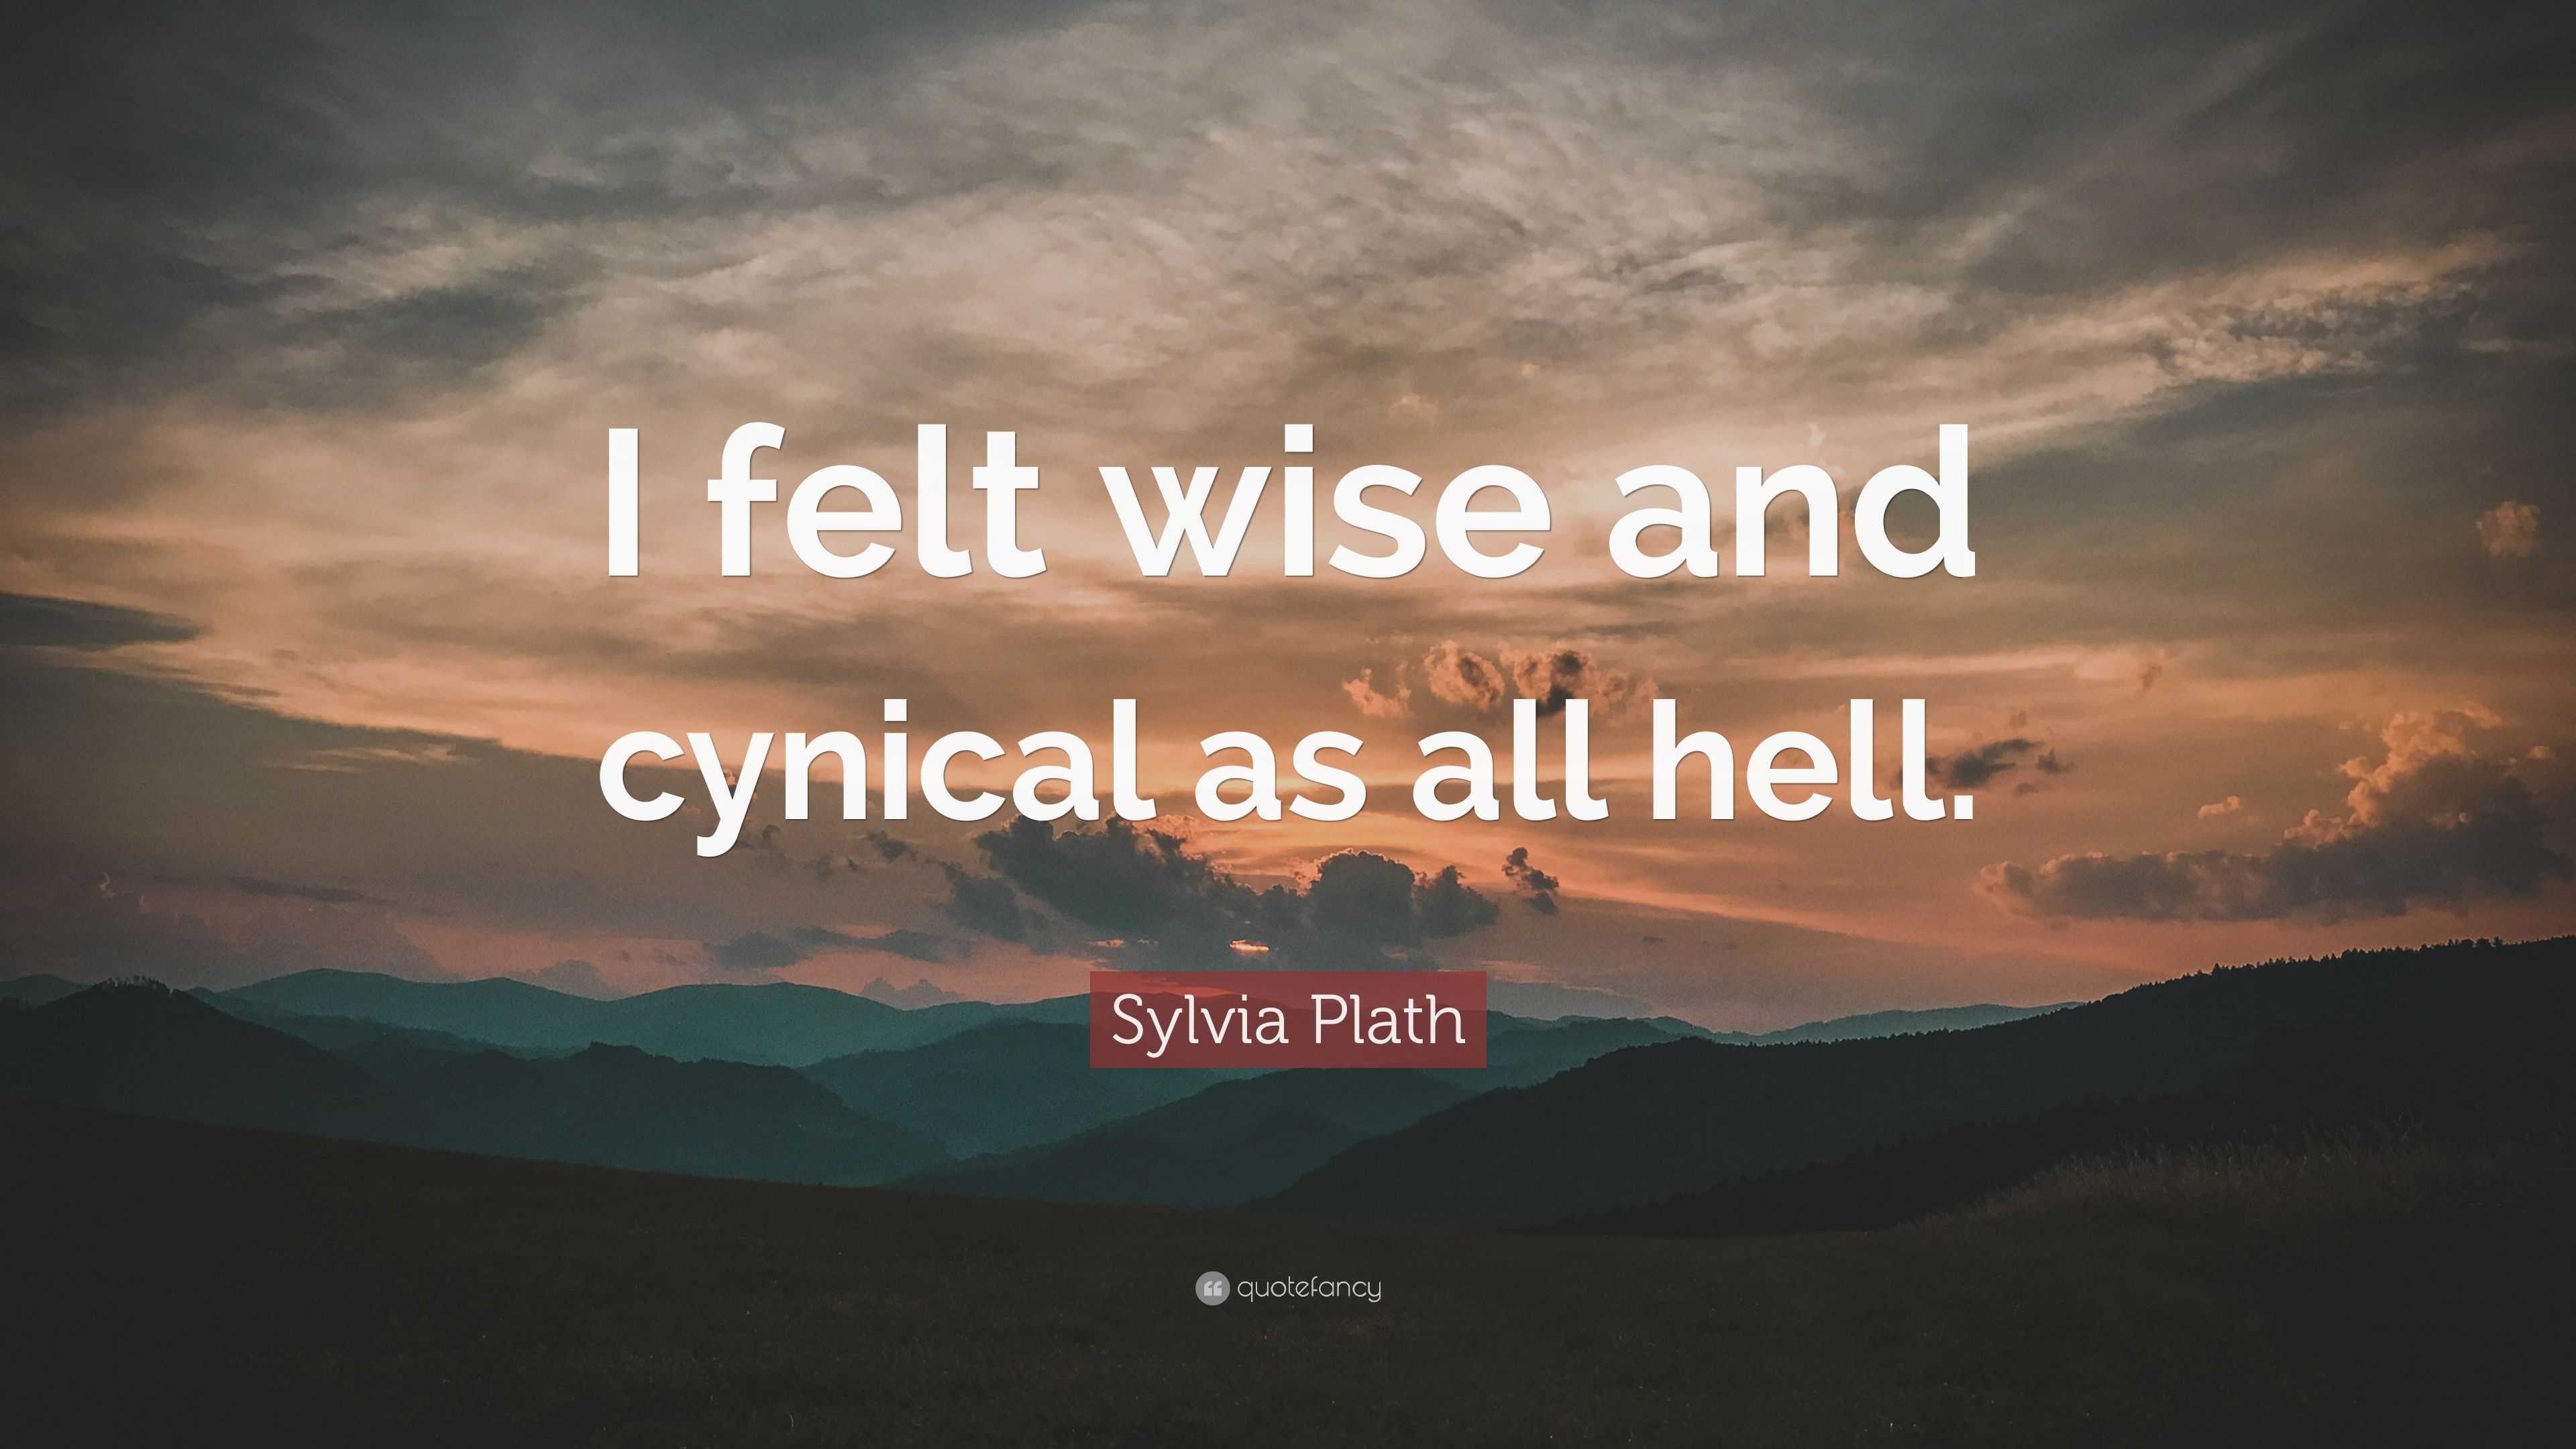 Sylvia Plath Quote: “I felt wise and cynical as all hell.”